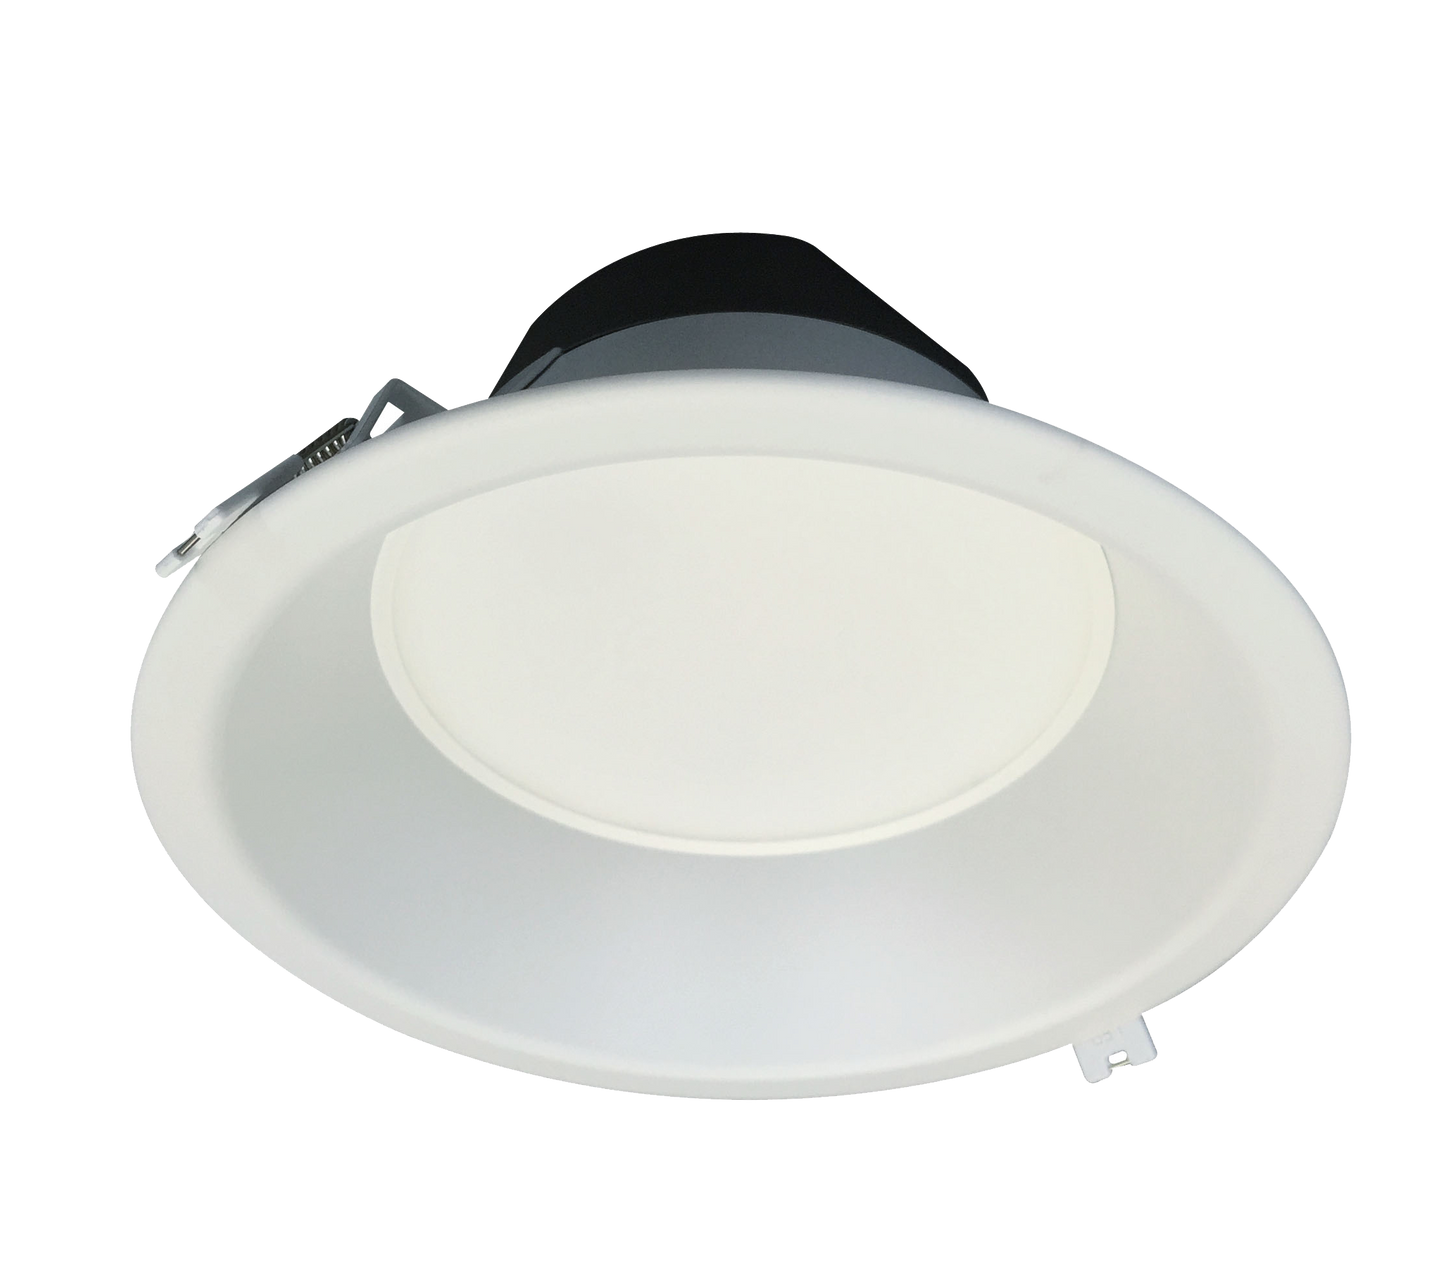 LED downlight 9W 830 recessed ZD FF 